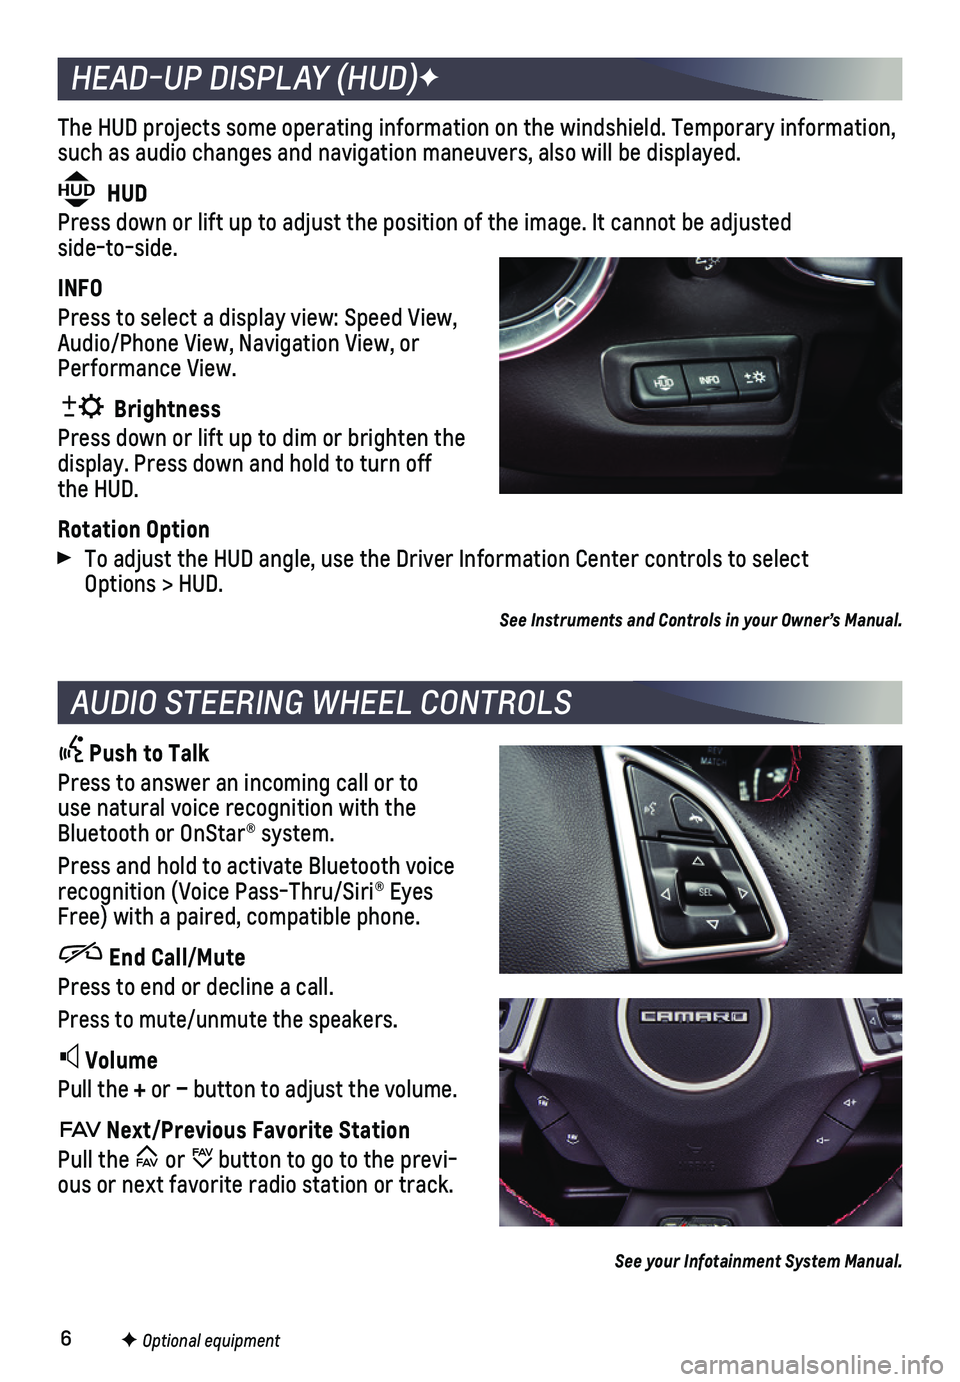 CHEVROLET CAMARO 2020  Owners Manual 6
The HUD projects some operating information on the windshield. Temporary\
 information, such as audio changes and navigation maneuvers, also will be  displayed.
HUD HUD
Press down or lift up to adju